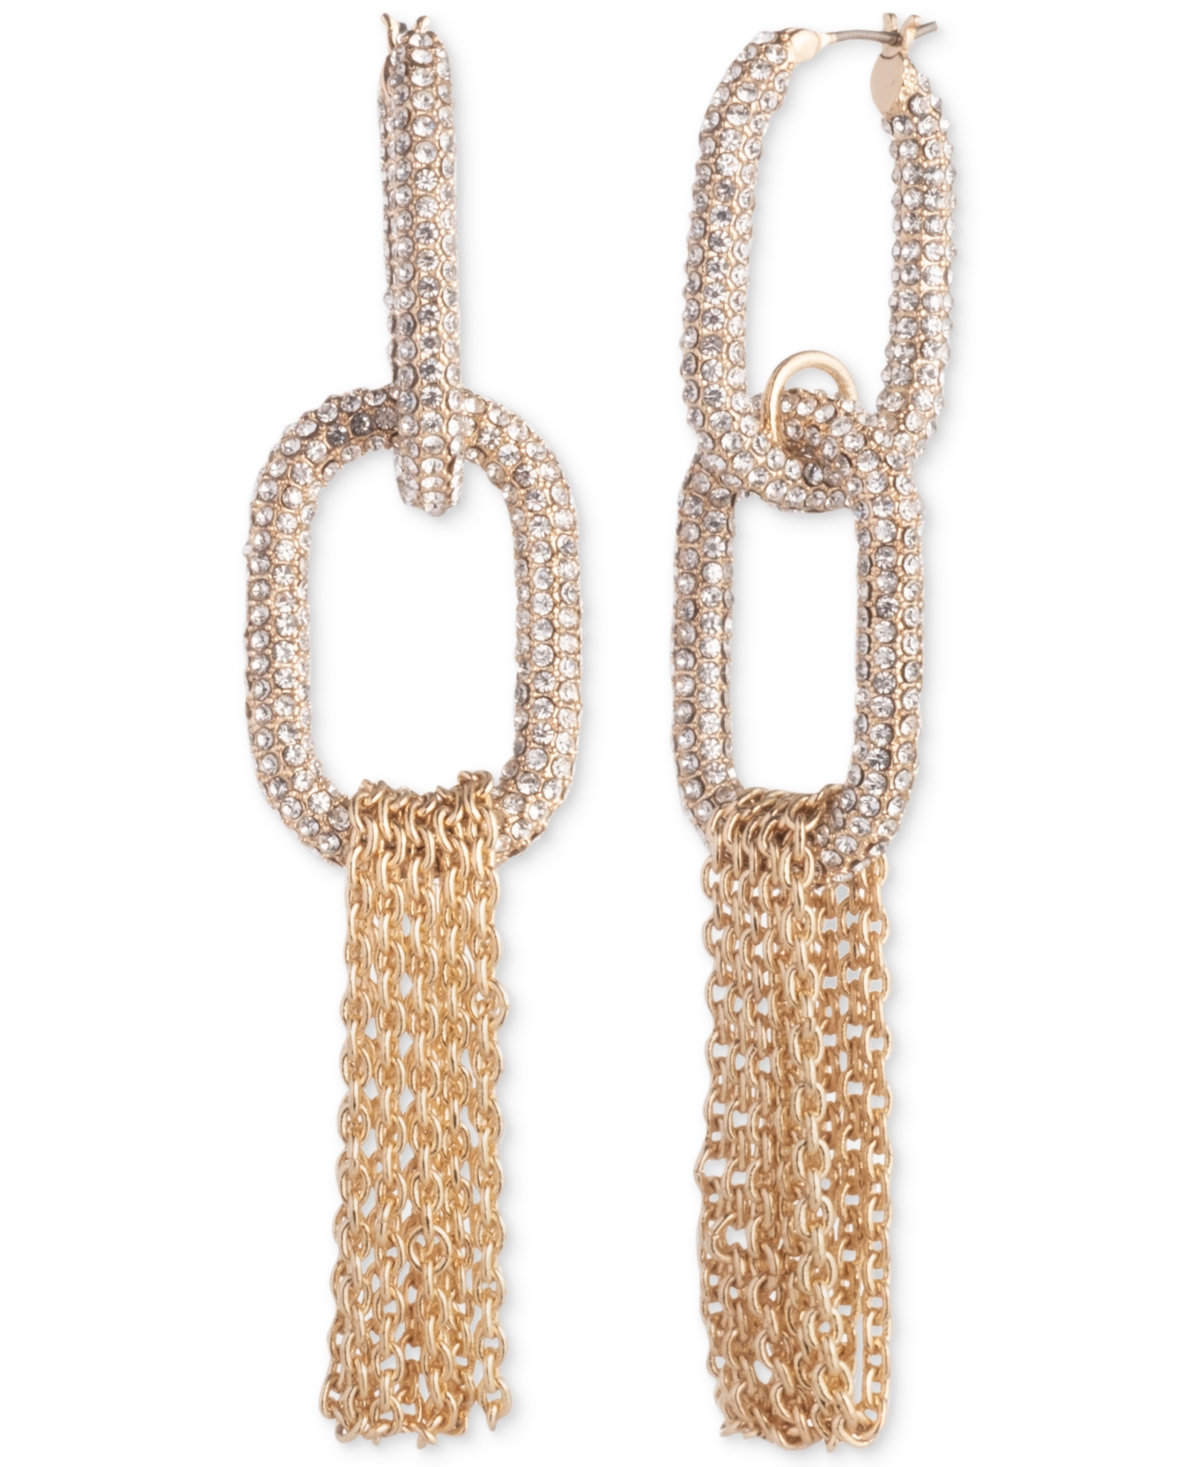 Gold-Tone Crystal Pave Chain Statement Earrings - White